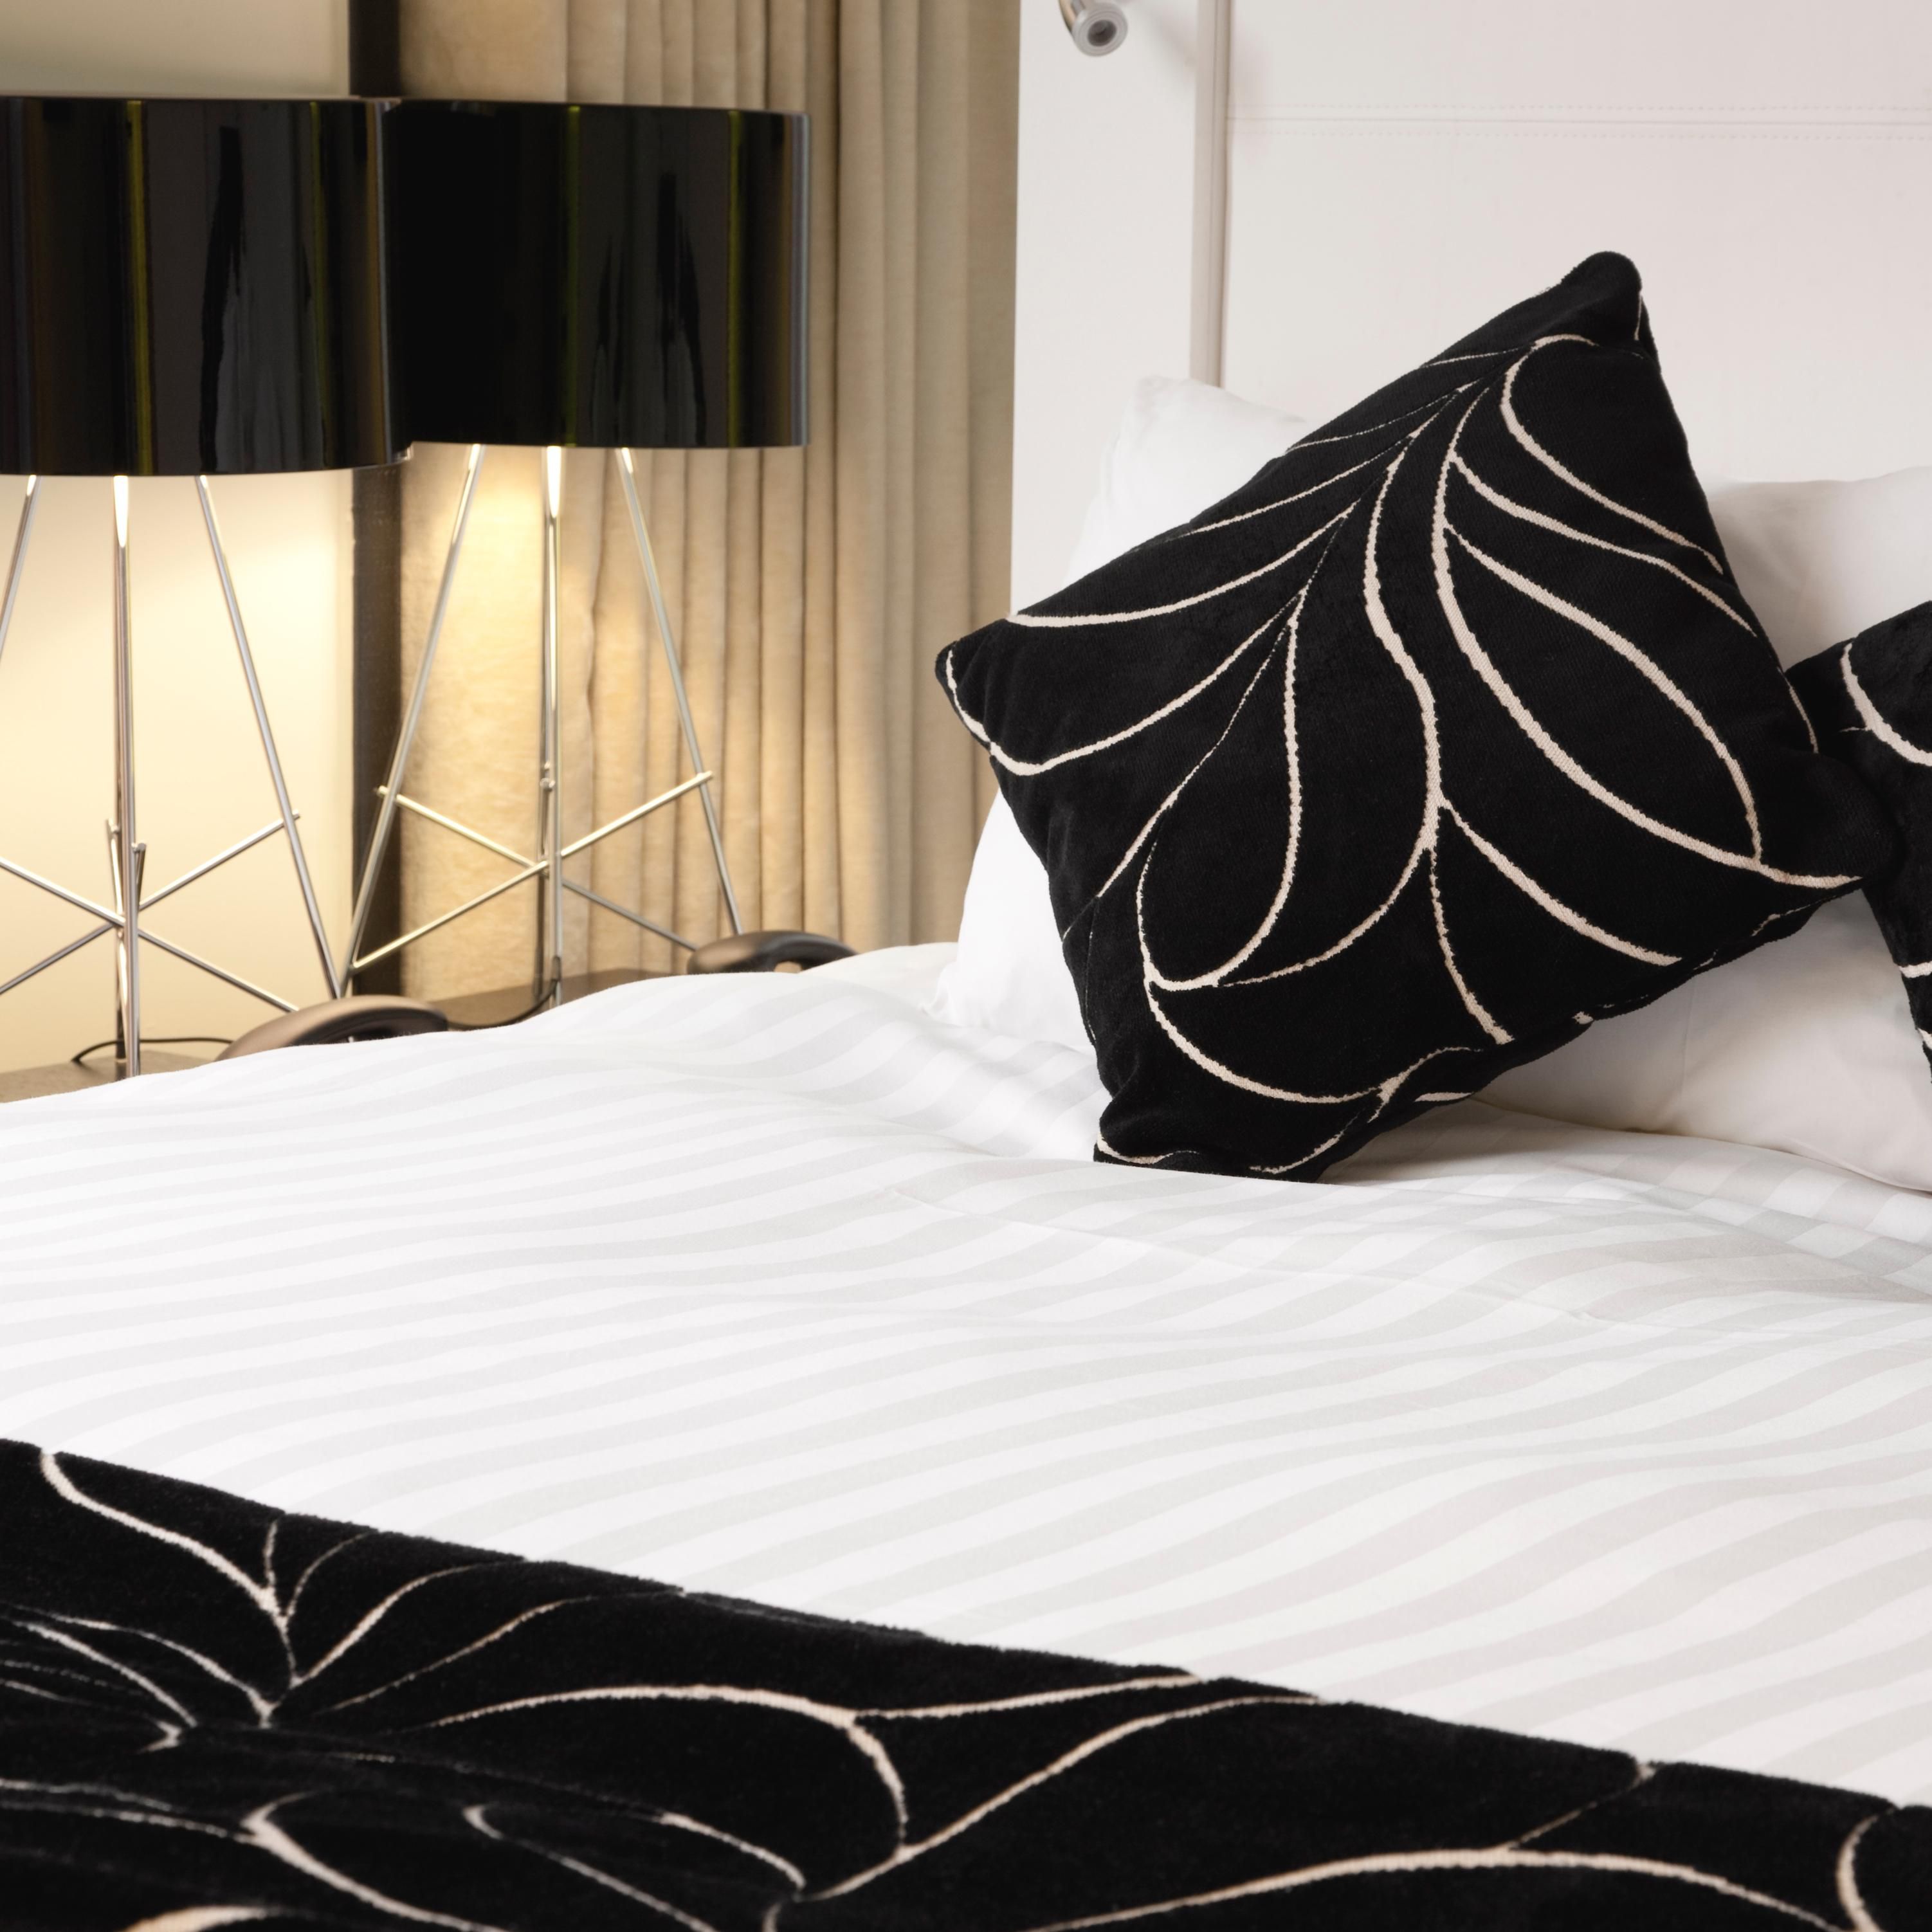 Discover the Crowne Plaza Sleep Advantage® with luxury bedding